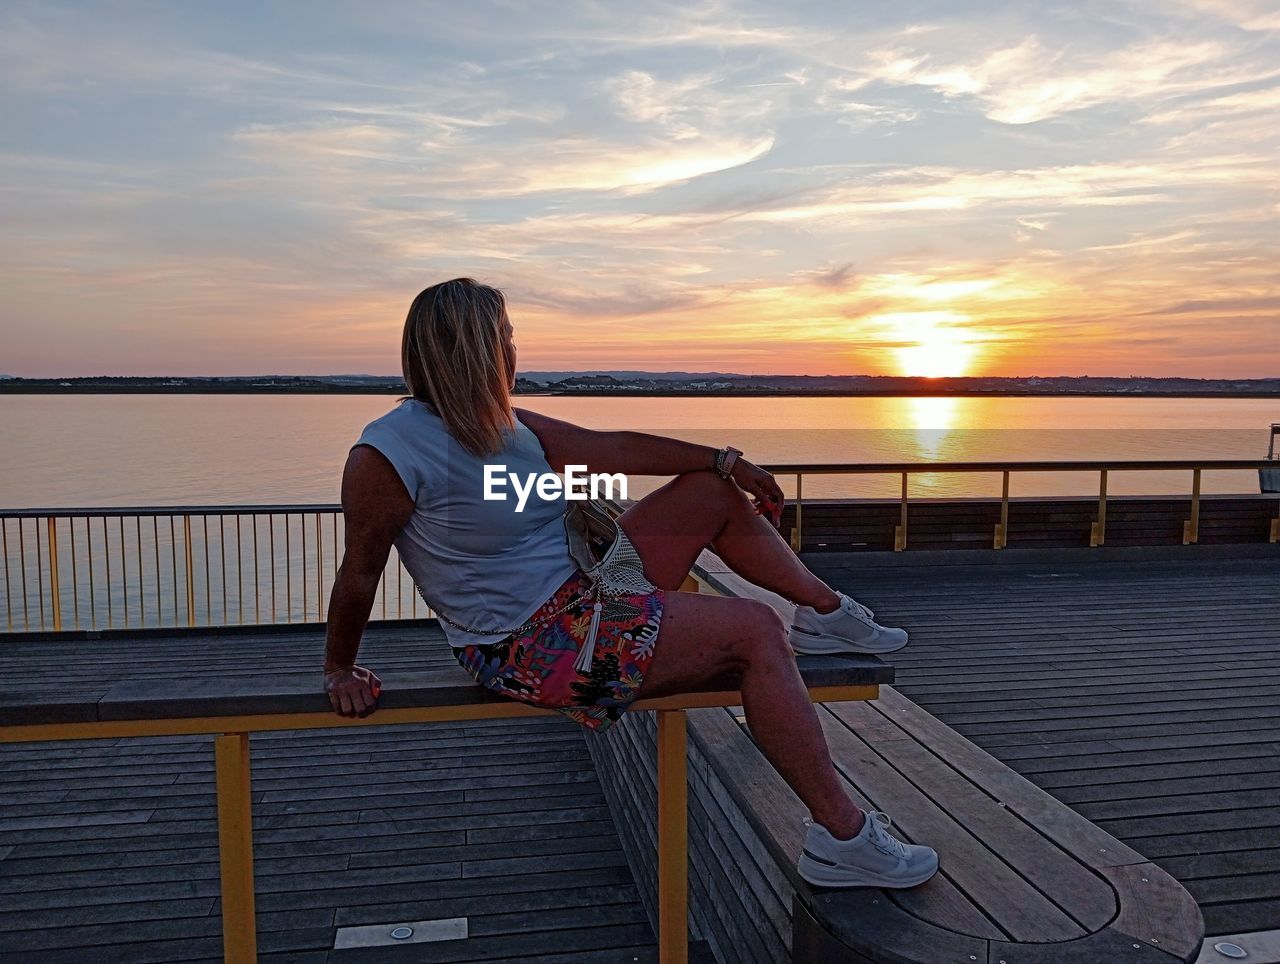 sky, sunset, water, one person, women, relaxation, adult, sea, lifestyles, nature, railing, leisure activity, beauty in nature, vacation, trip, holiday, full length, tranquility, cloud, sitting, dusk, young adult, casual clothing, summer, tranquil scene, female, scenics - nature, architecture, travel, travel destinations, sun, sunlight, land, rear view, idyllic, twilight, ocean, outdoors, beach, looking at view, hairstyle, horizon, horizon over water, tourism, pier, activity, copy space, enjoyment, long hair, blue, person